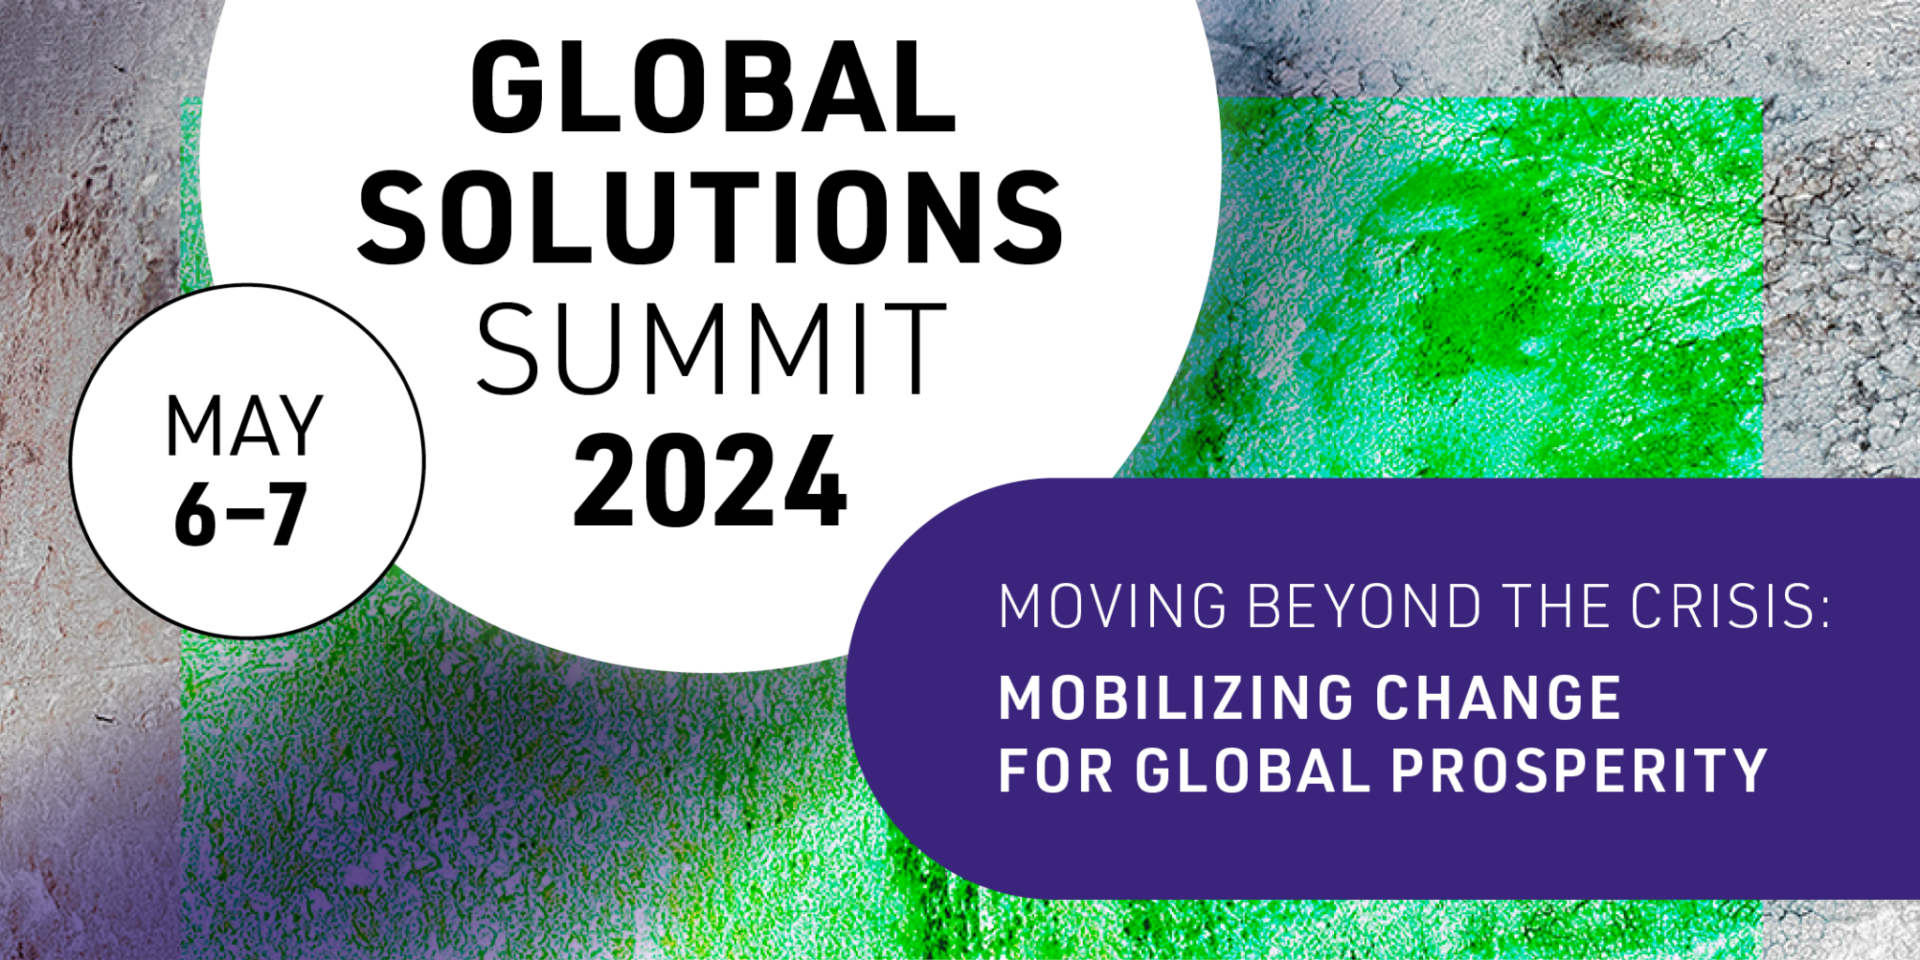 The Global Solutions Summit – the World Policy Forum – is an international conference aimed at addressing key policy challenges facing the G20 and